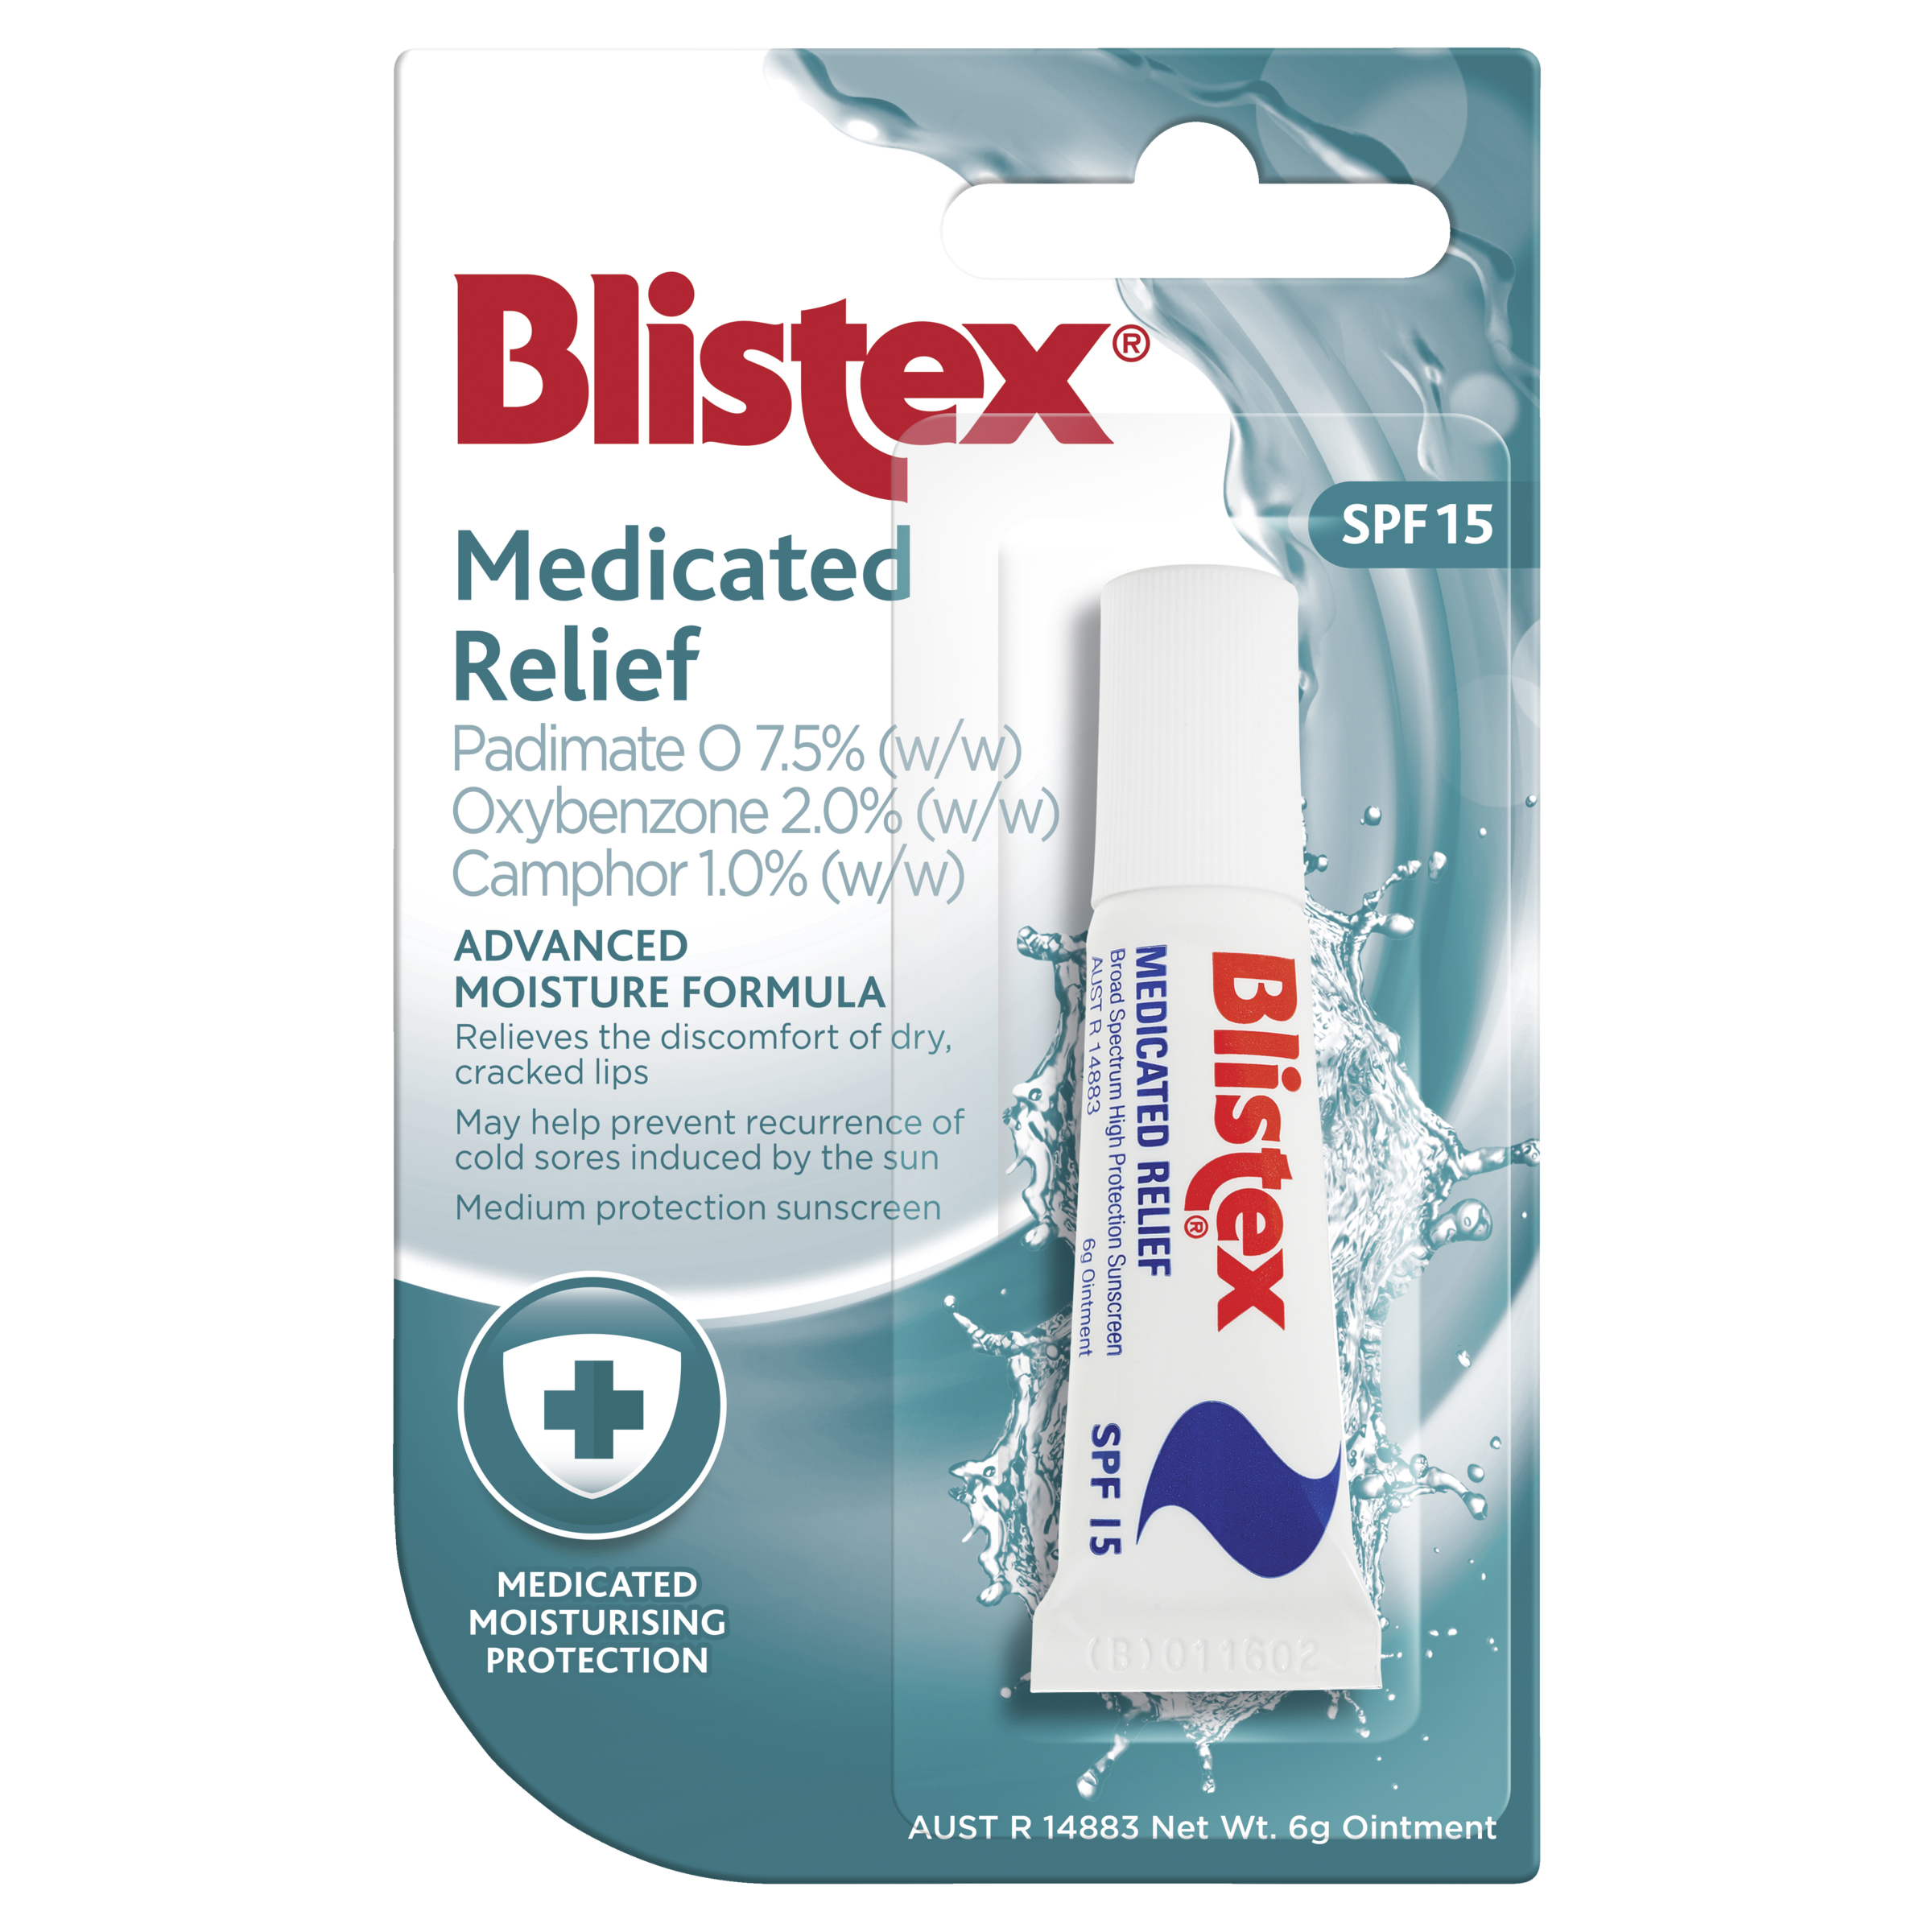 Blistex Medicated Relief Ointment SPF 15